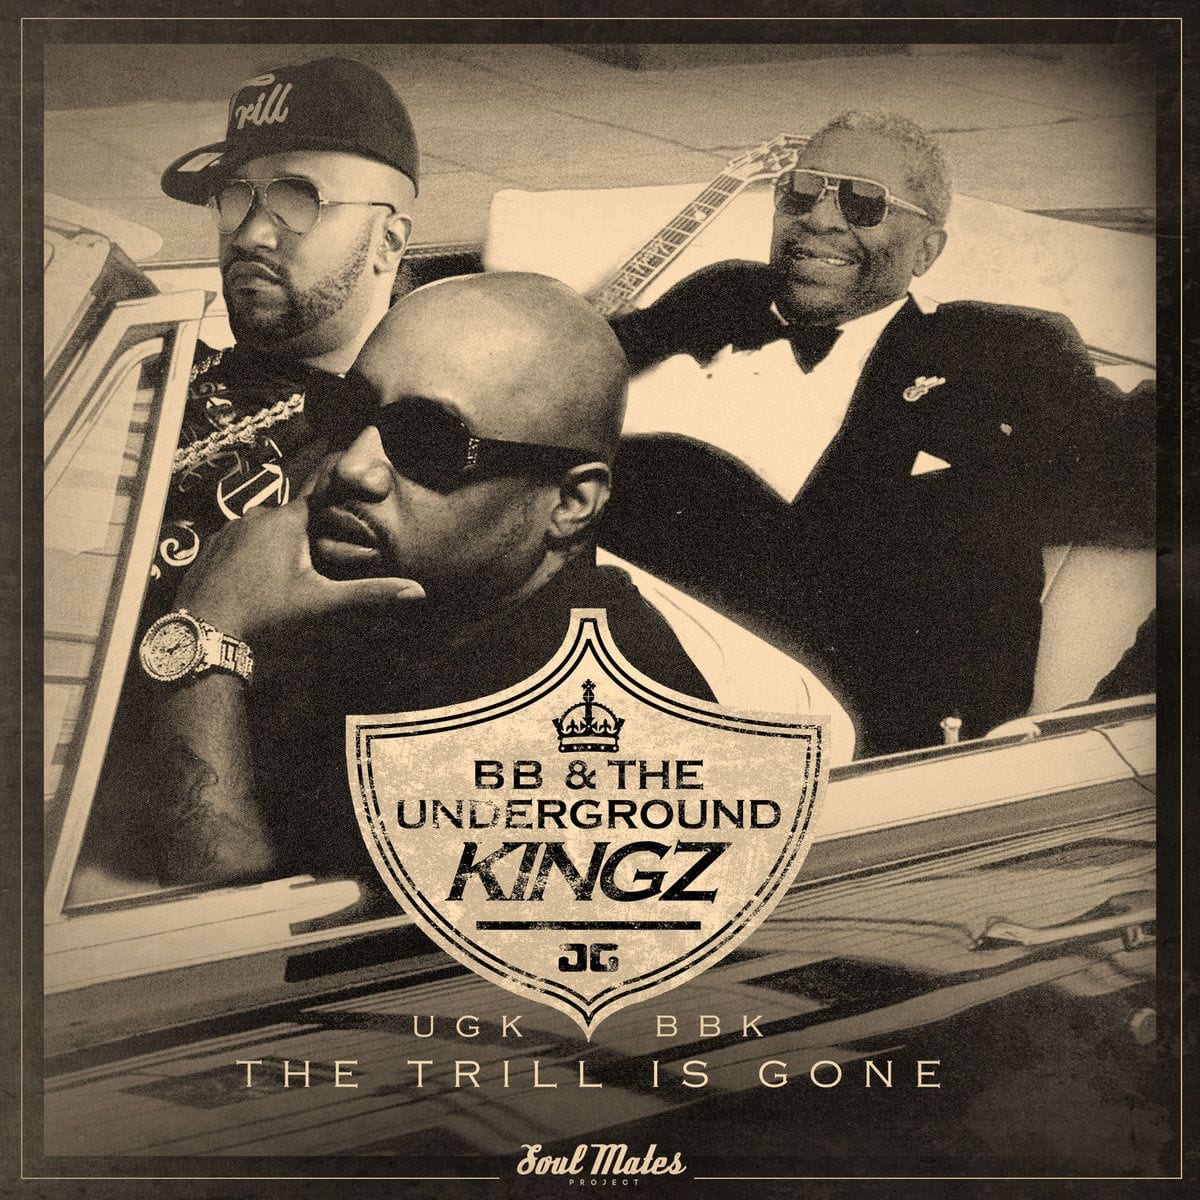 B.B. King and UGK: The Trill Is Gone